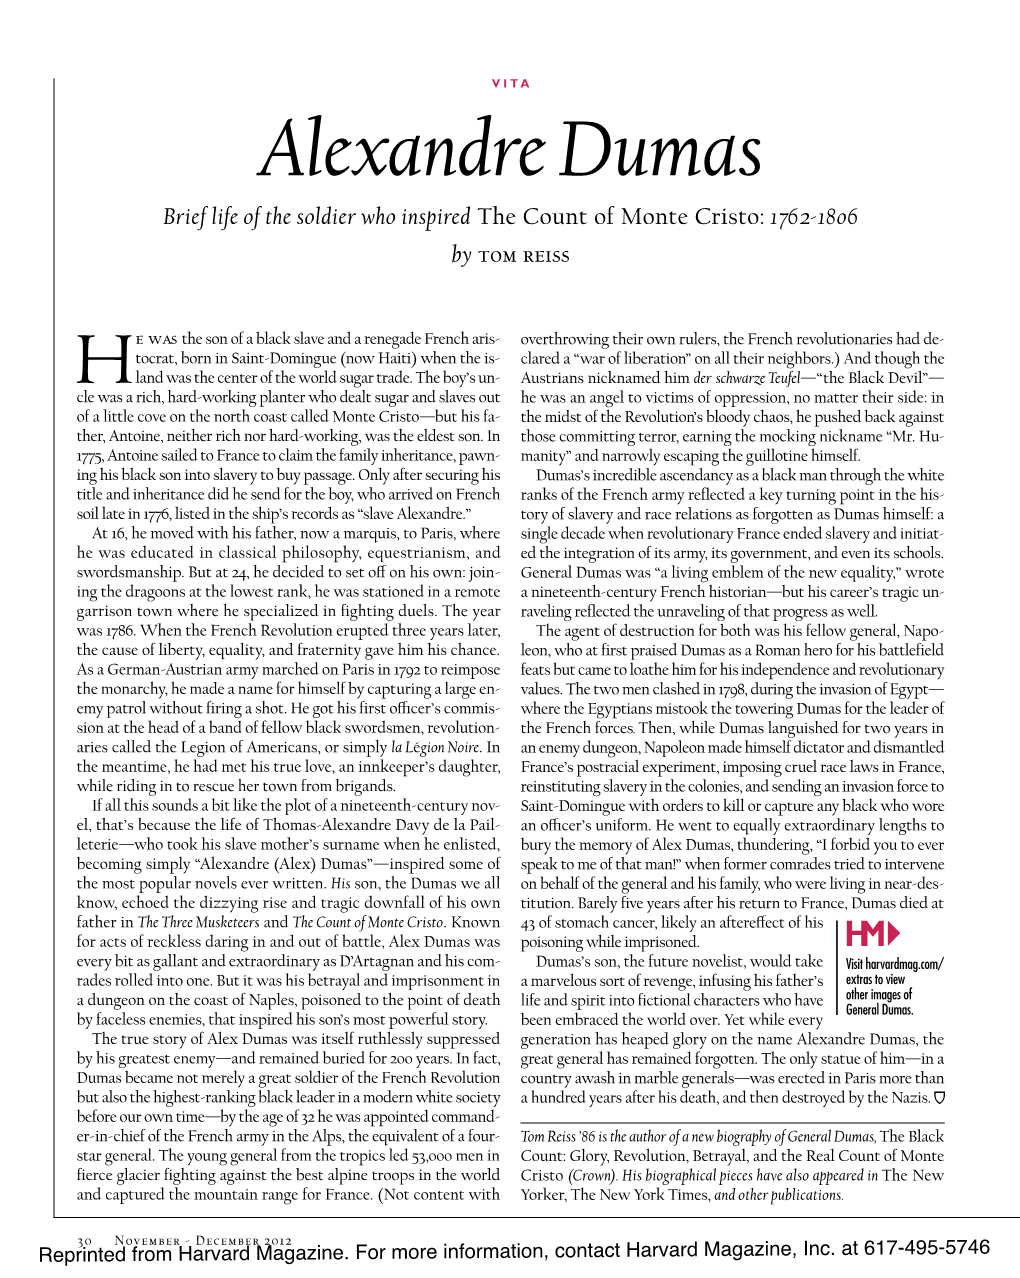 Alexandre Dumas Brief Life of the Soldier Who Inspired the Count of Monte Cristo: 1762-1806 by Tom Reiss